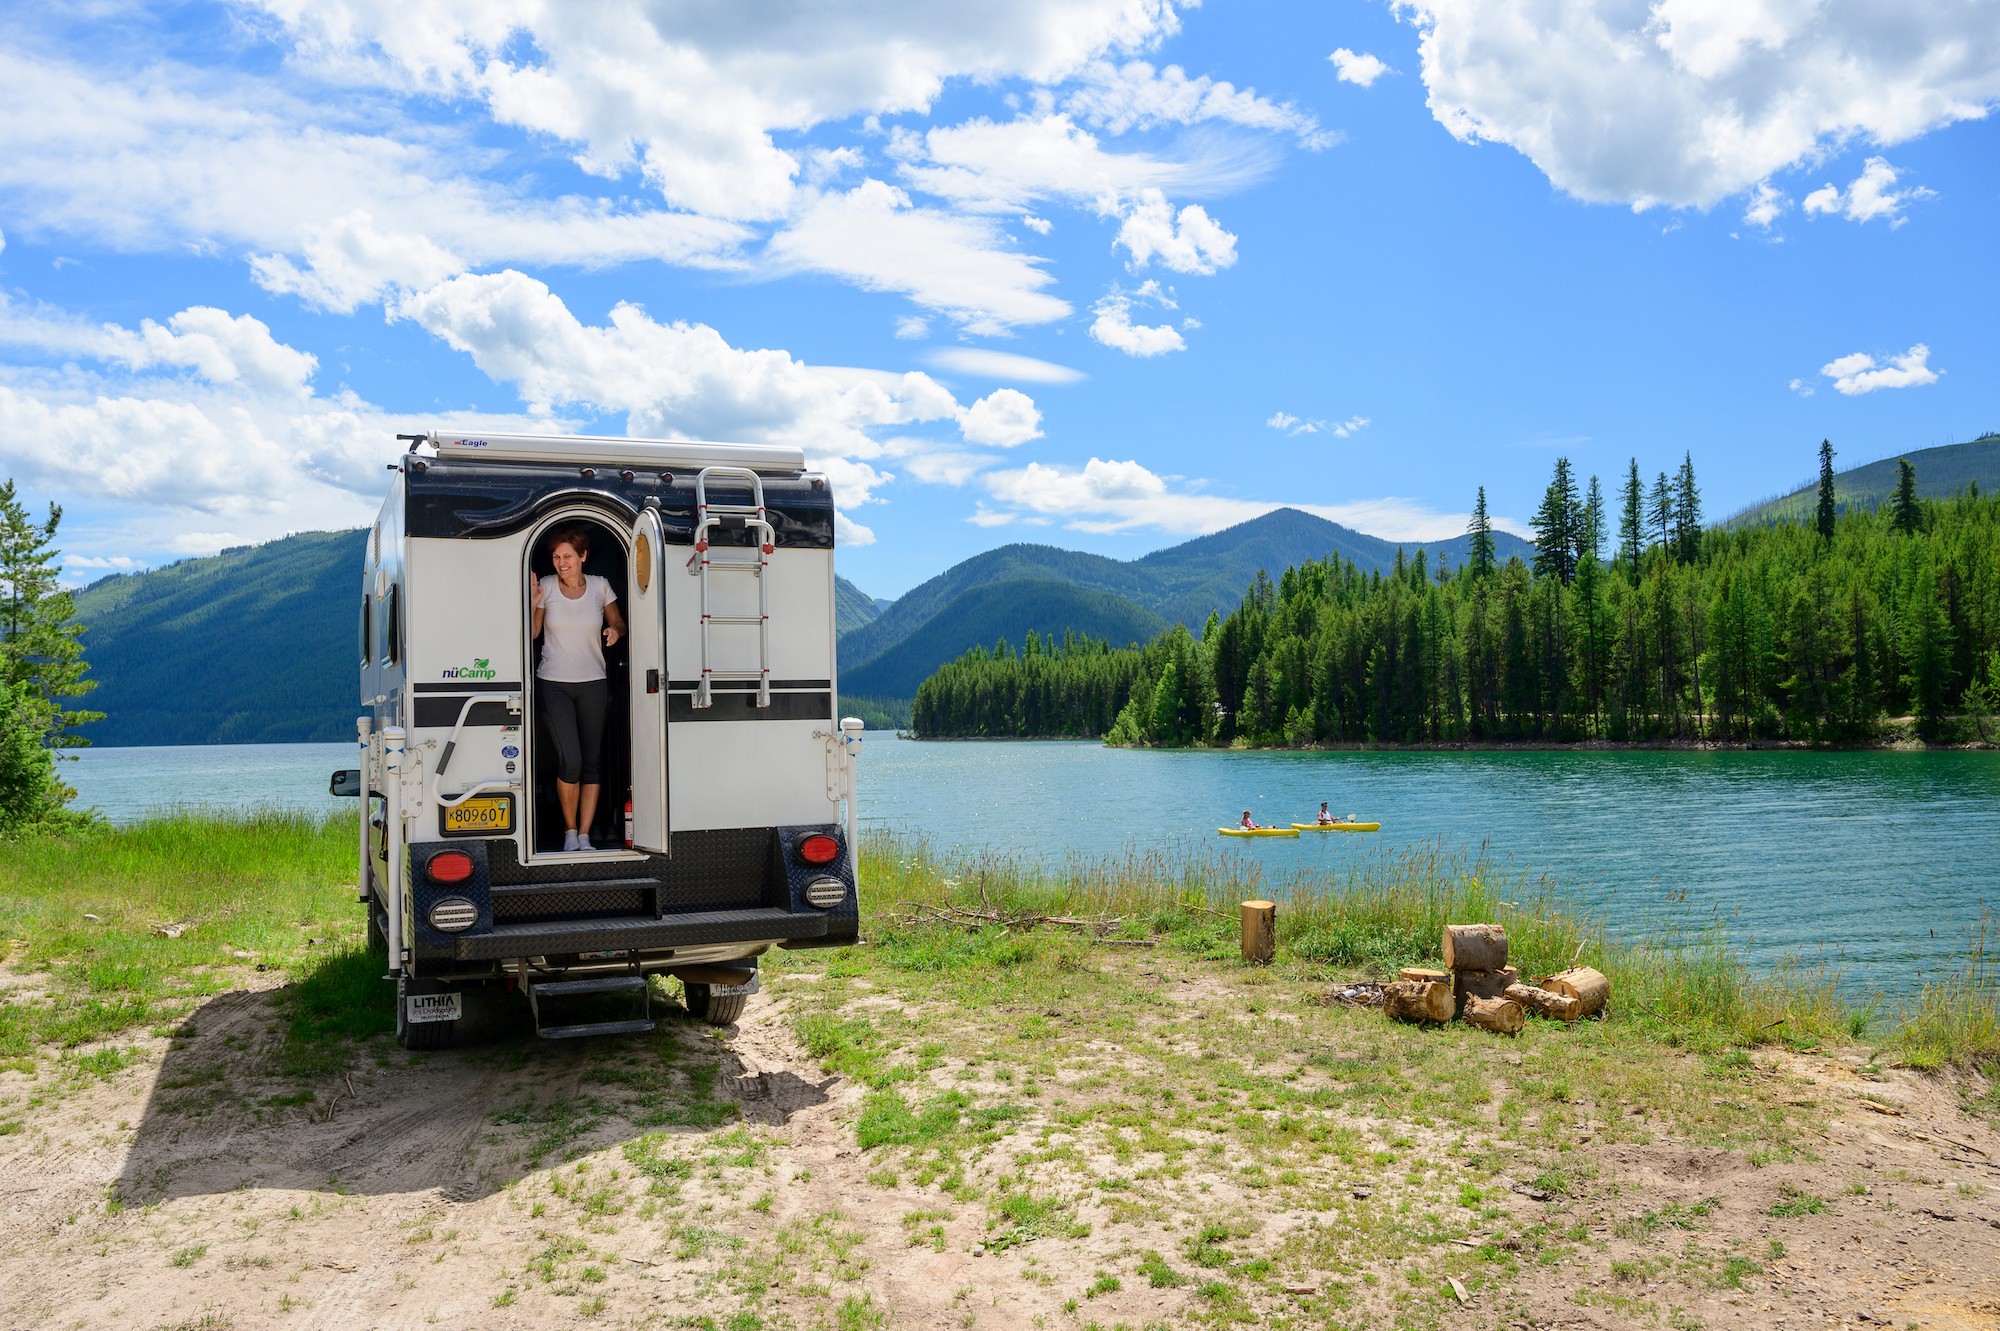 An RV campsite overlooking Hungry Horse Reservoir, South Fork Flathead River, and the Rocky Mountains in northwest Montana on a sunny day